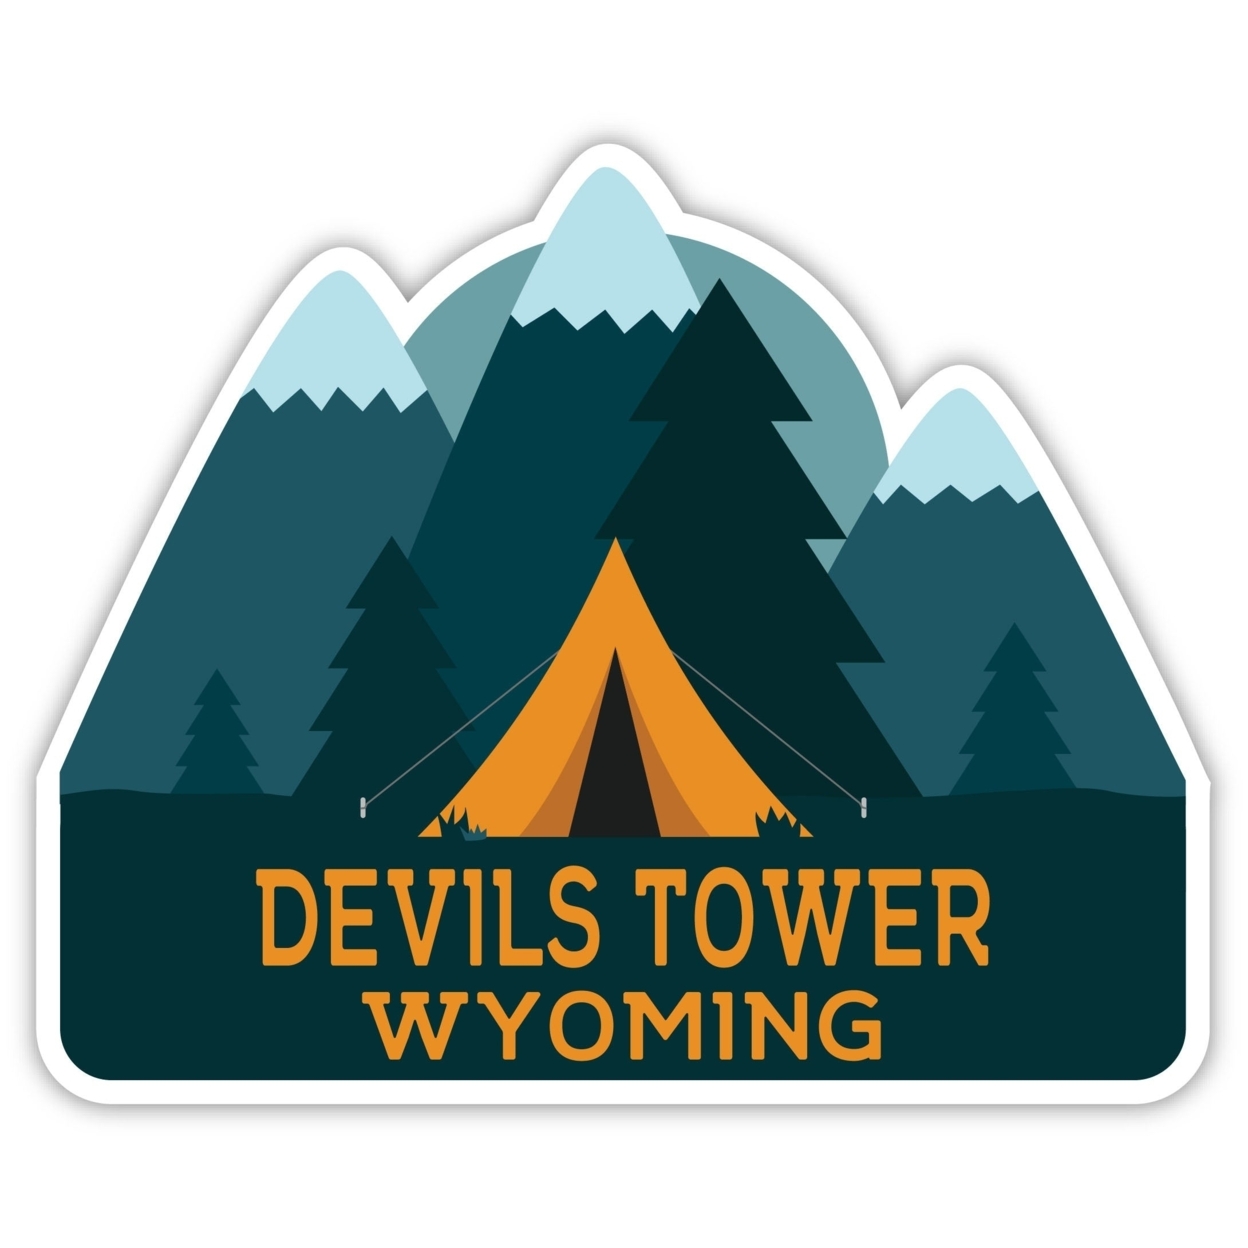 Devils Tower Wyoming Souvenir Decorative Stickers (Choose Theme And Size) - 4-Pack, 12-Inch, Tent